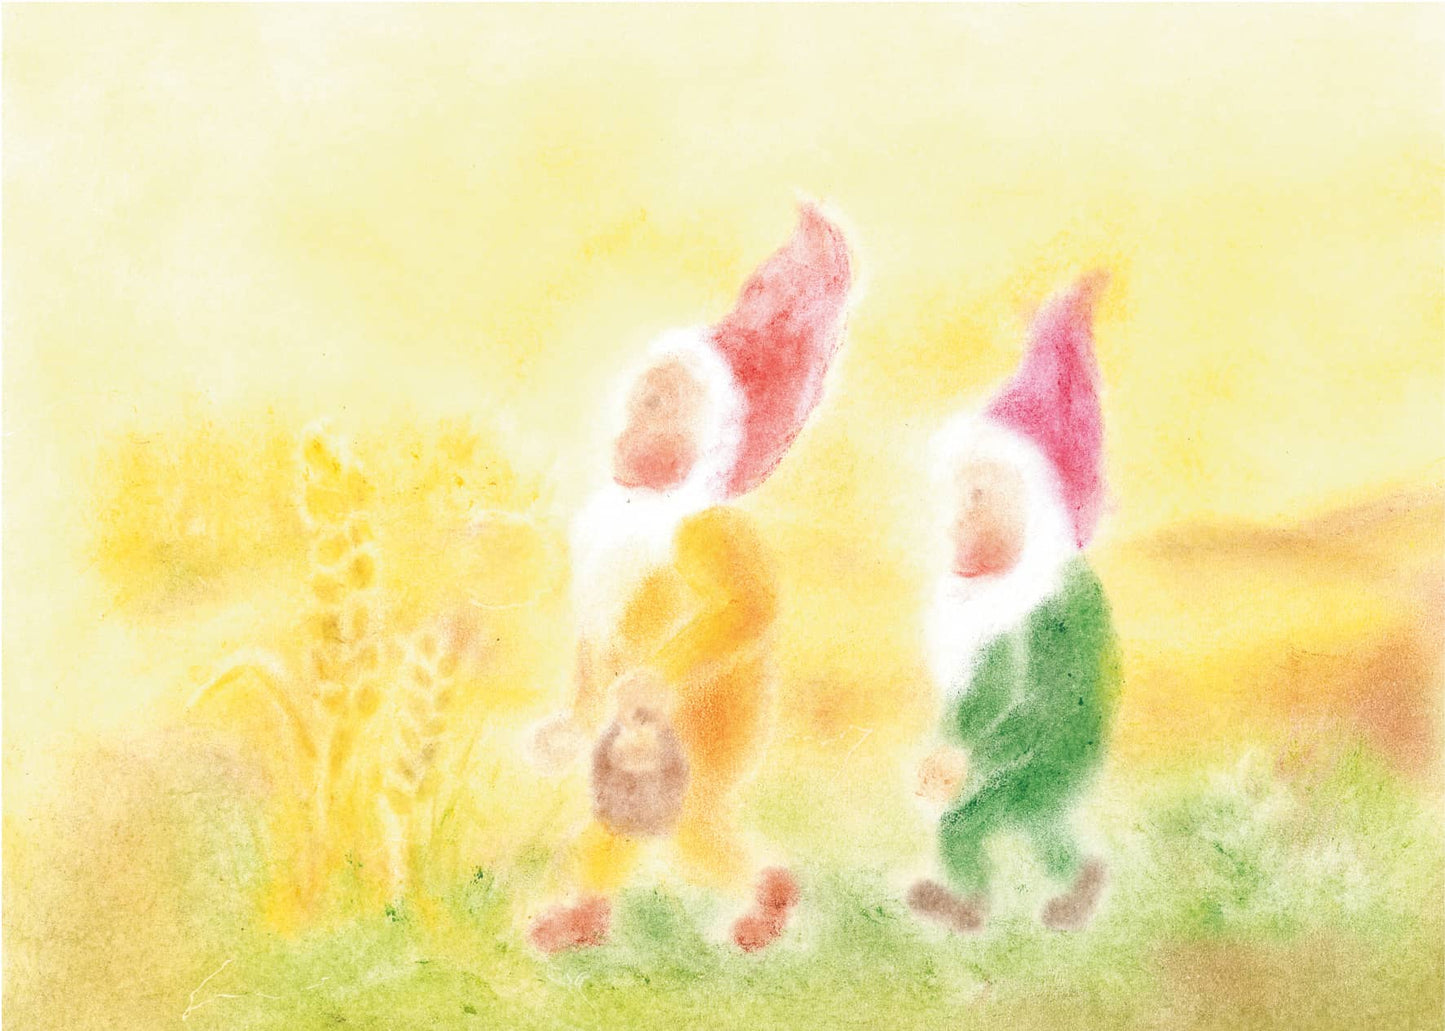 Seccorell postcard "Cornfield" shows gnomes strolling happily through a golden field, surrounded by summer warmth.